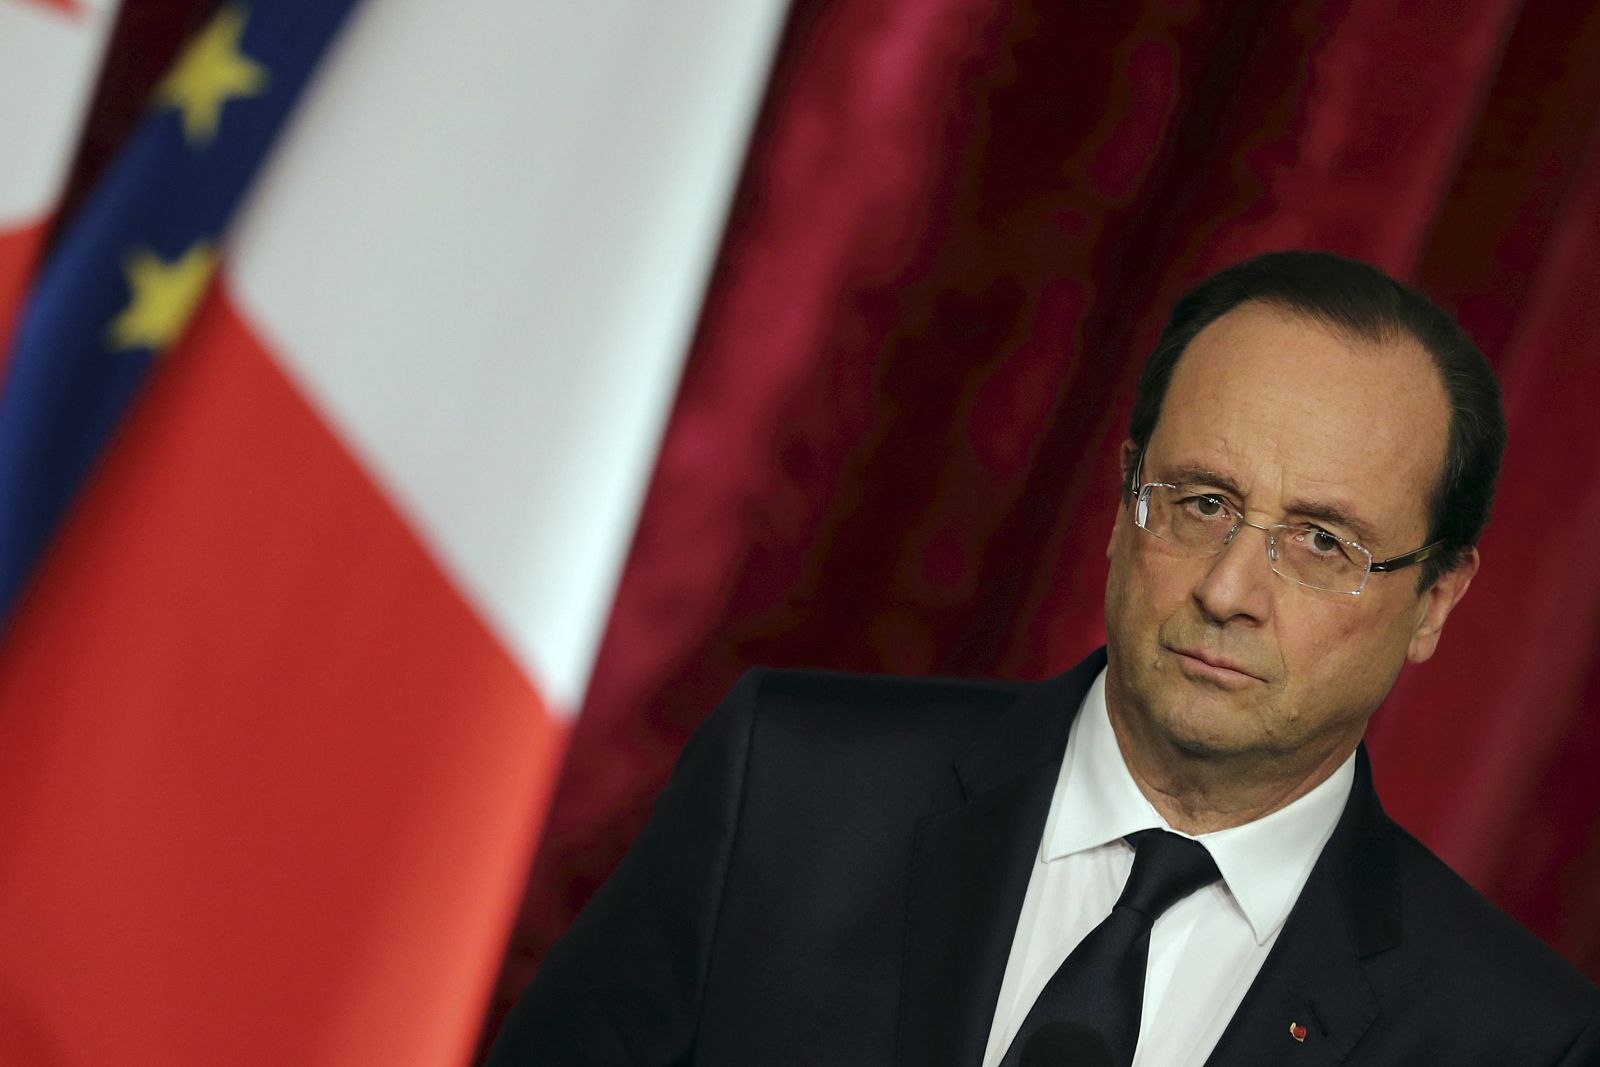 French President Hollande listens to Tunisian President Marzouki at the Elysee Palace in Paris